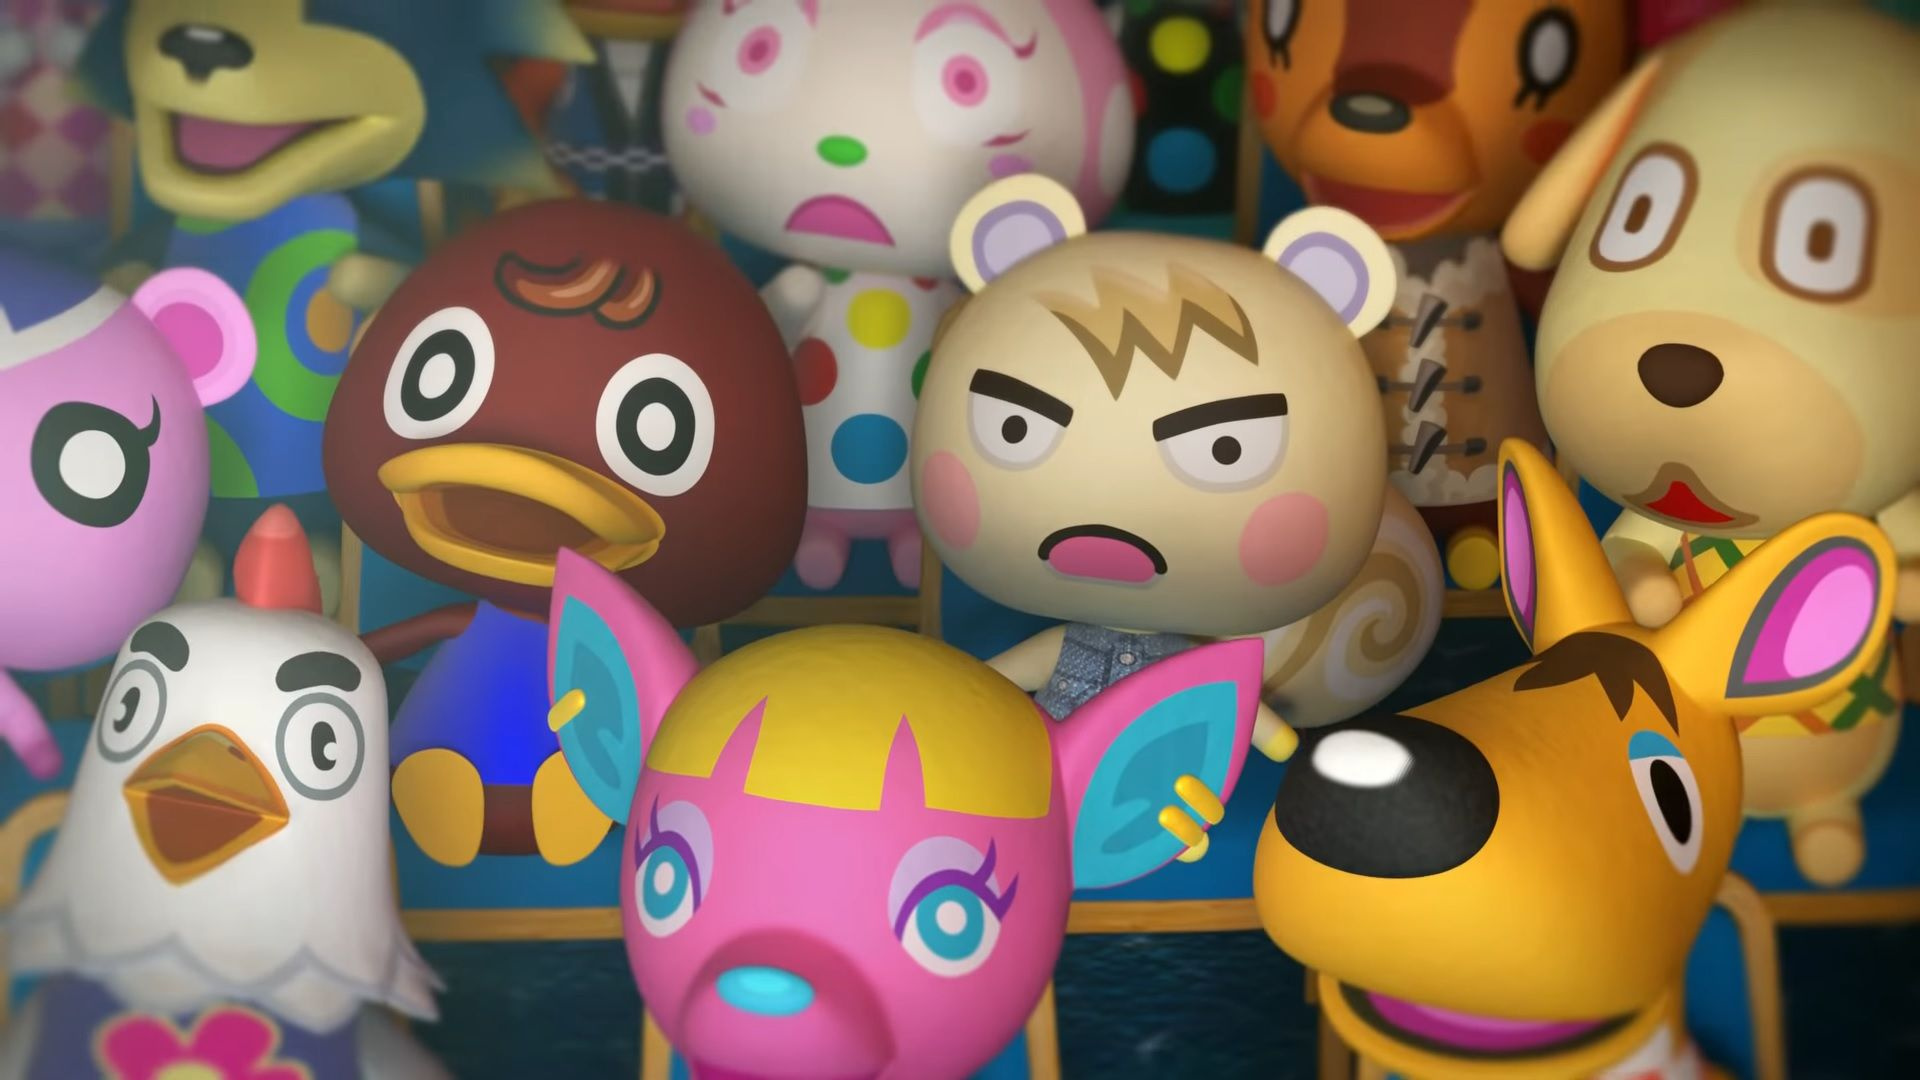 Animal Crossing: New Horizons Version 1.1.0 Update Arrives Before The